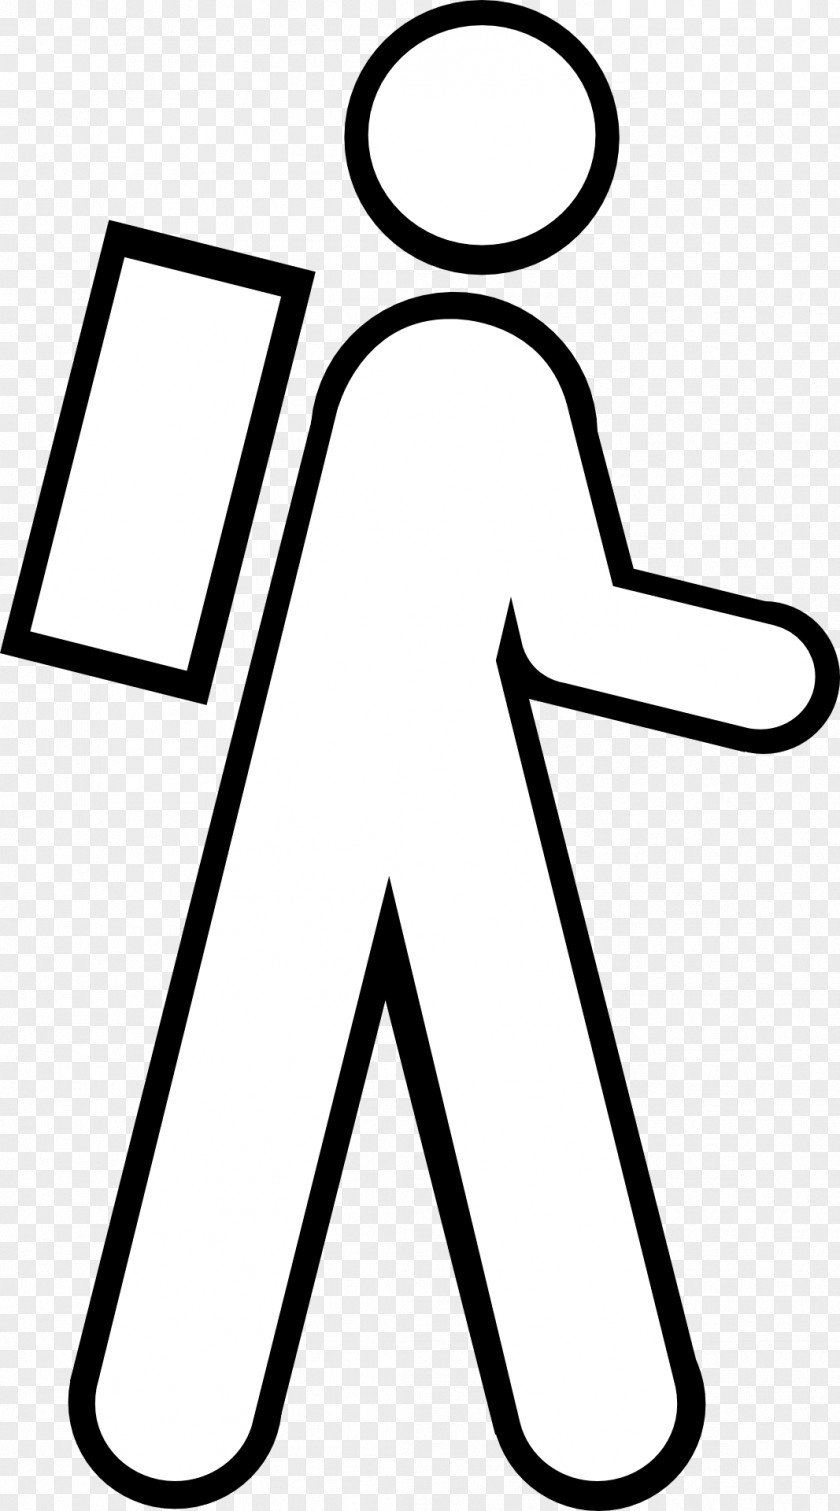 Backpackers Stick Figure Backpack Clip Art PNG